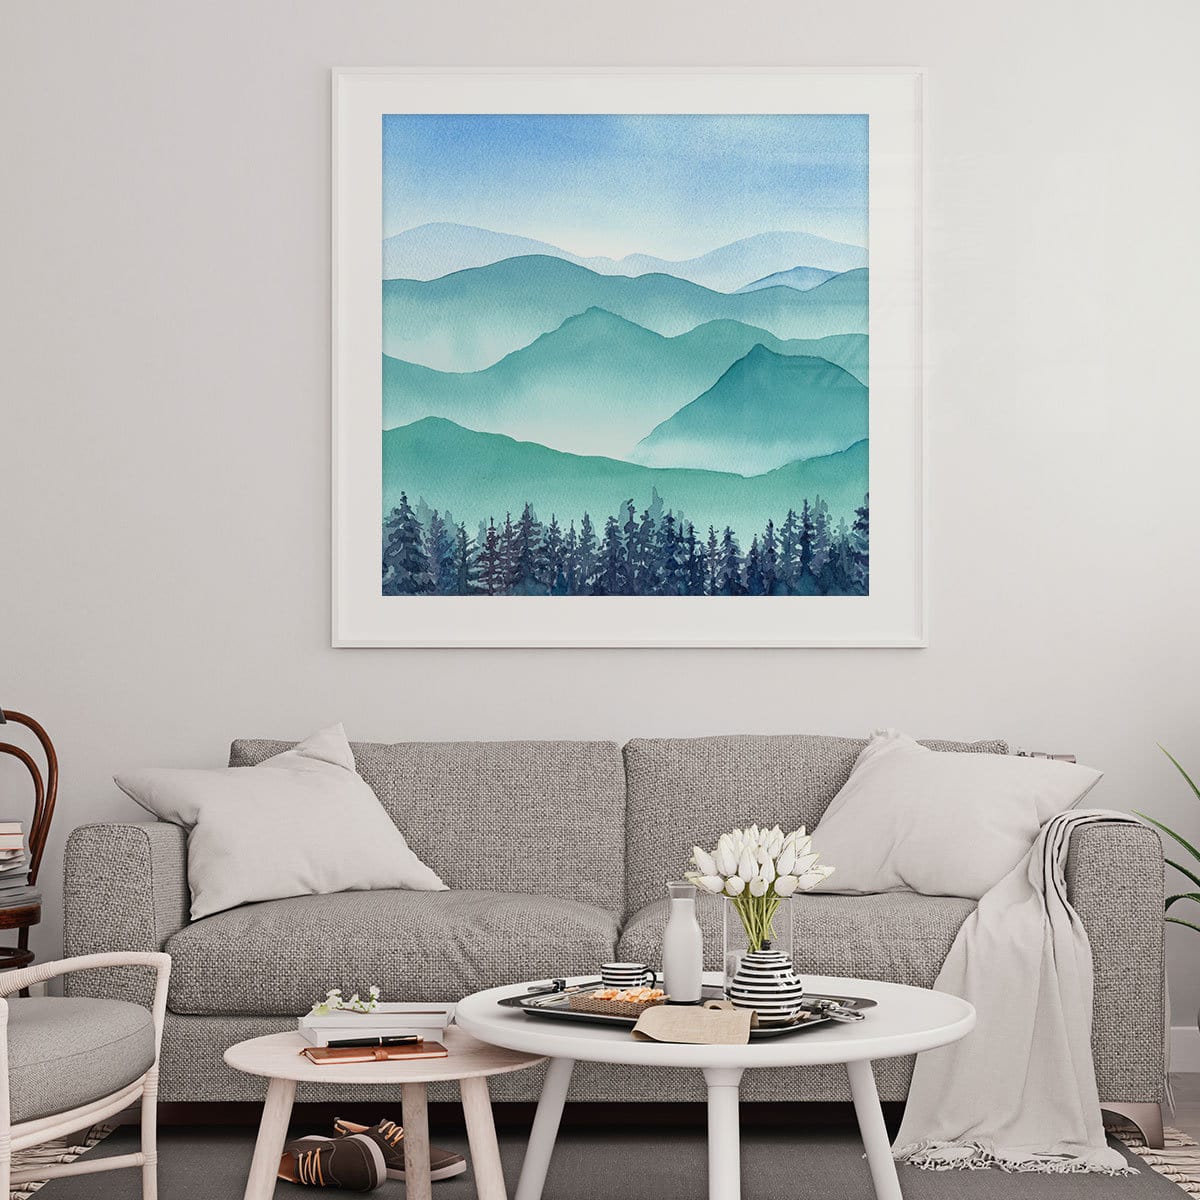 Watercolour Mountains in Blue Printed and Framed, Displayed Above Couch in Living Room